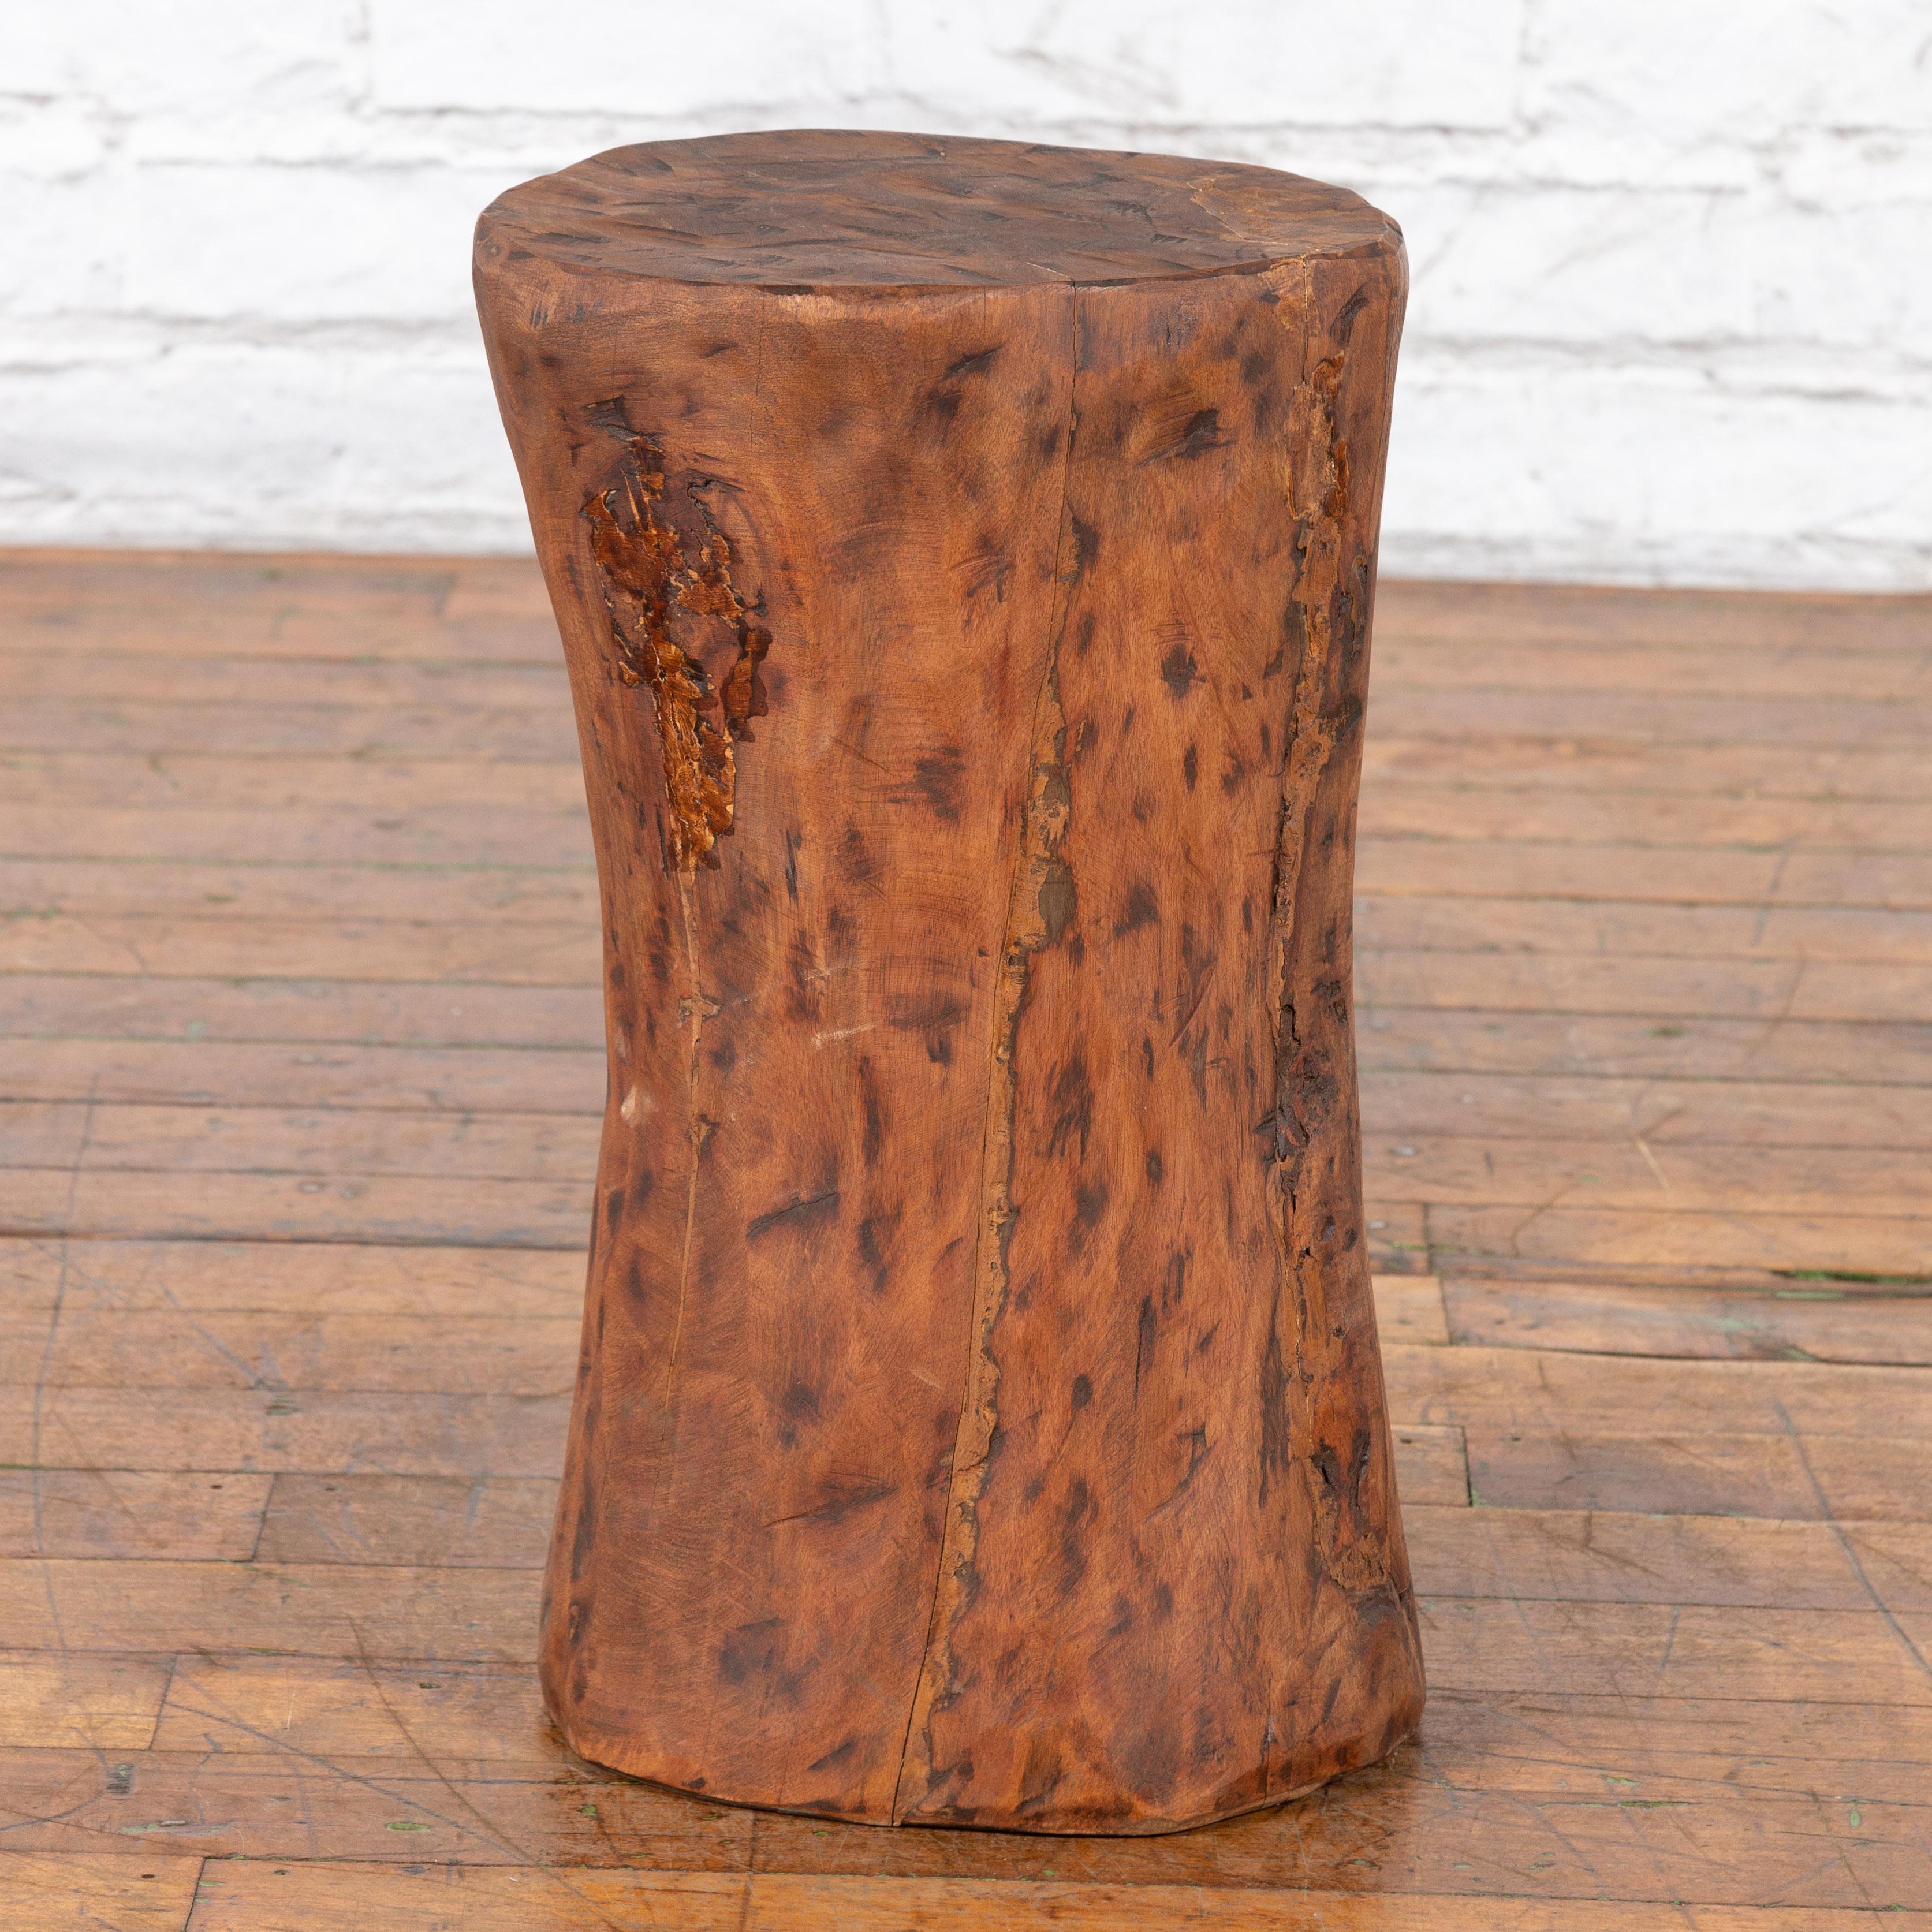 Vintage Chinese Tree Stump Wooden Pedestal with Rustic Character For Sale 9